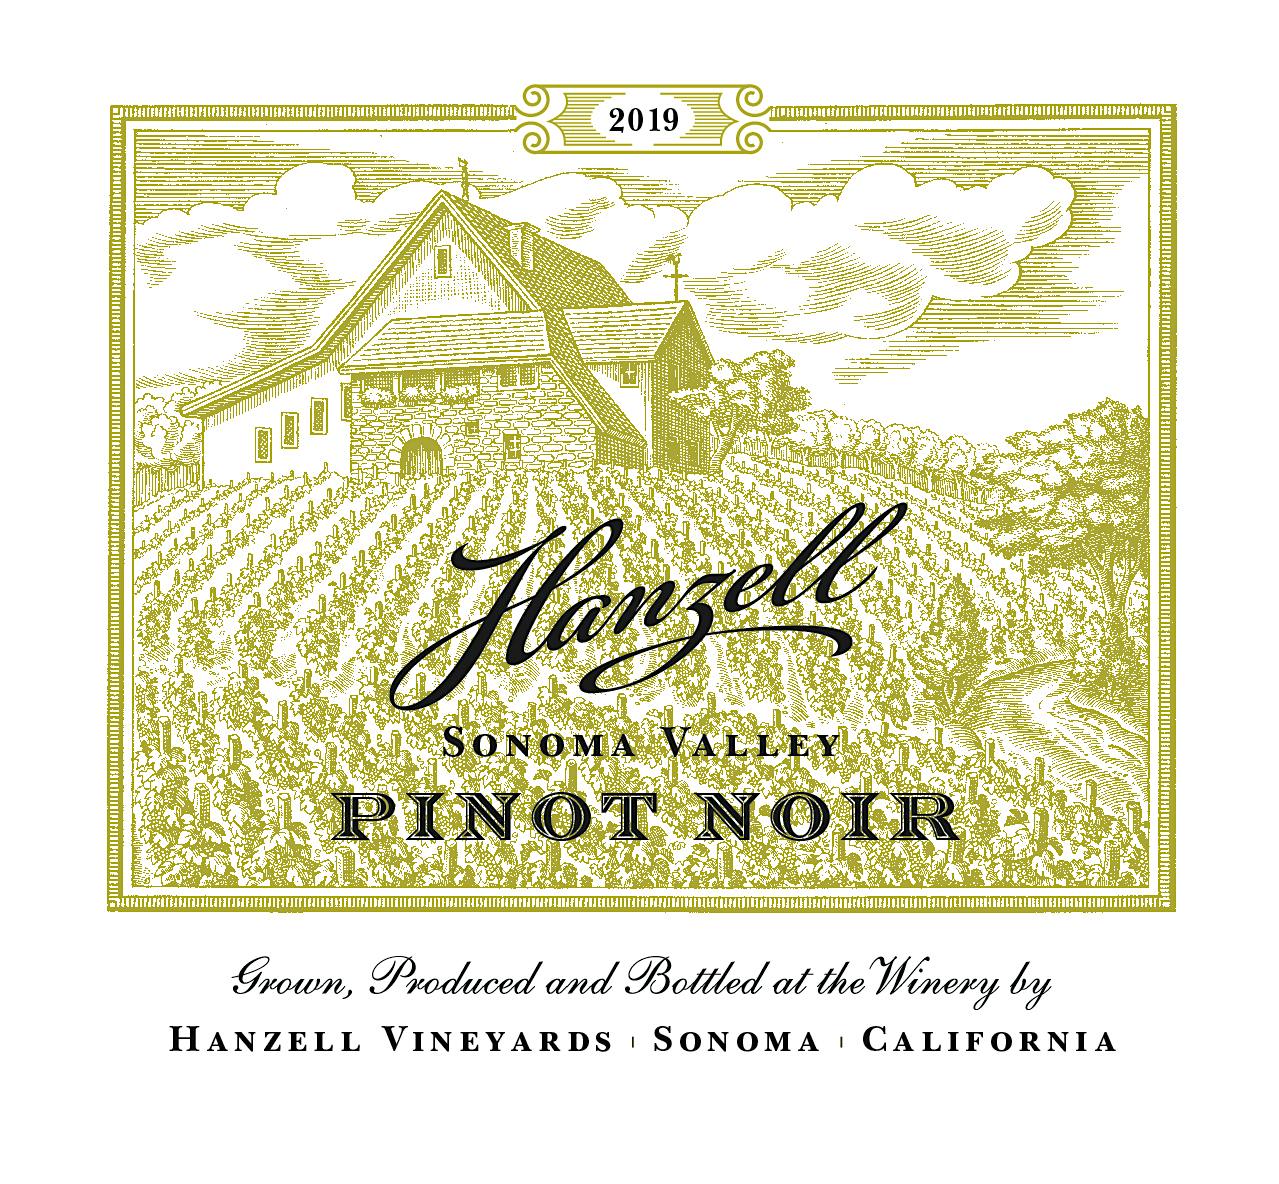 Label for Hanzell